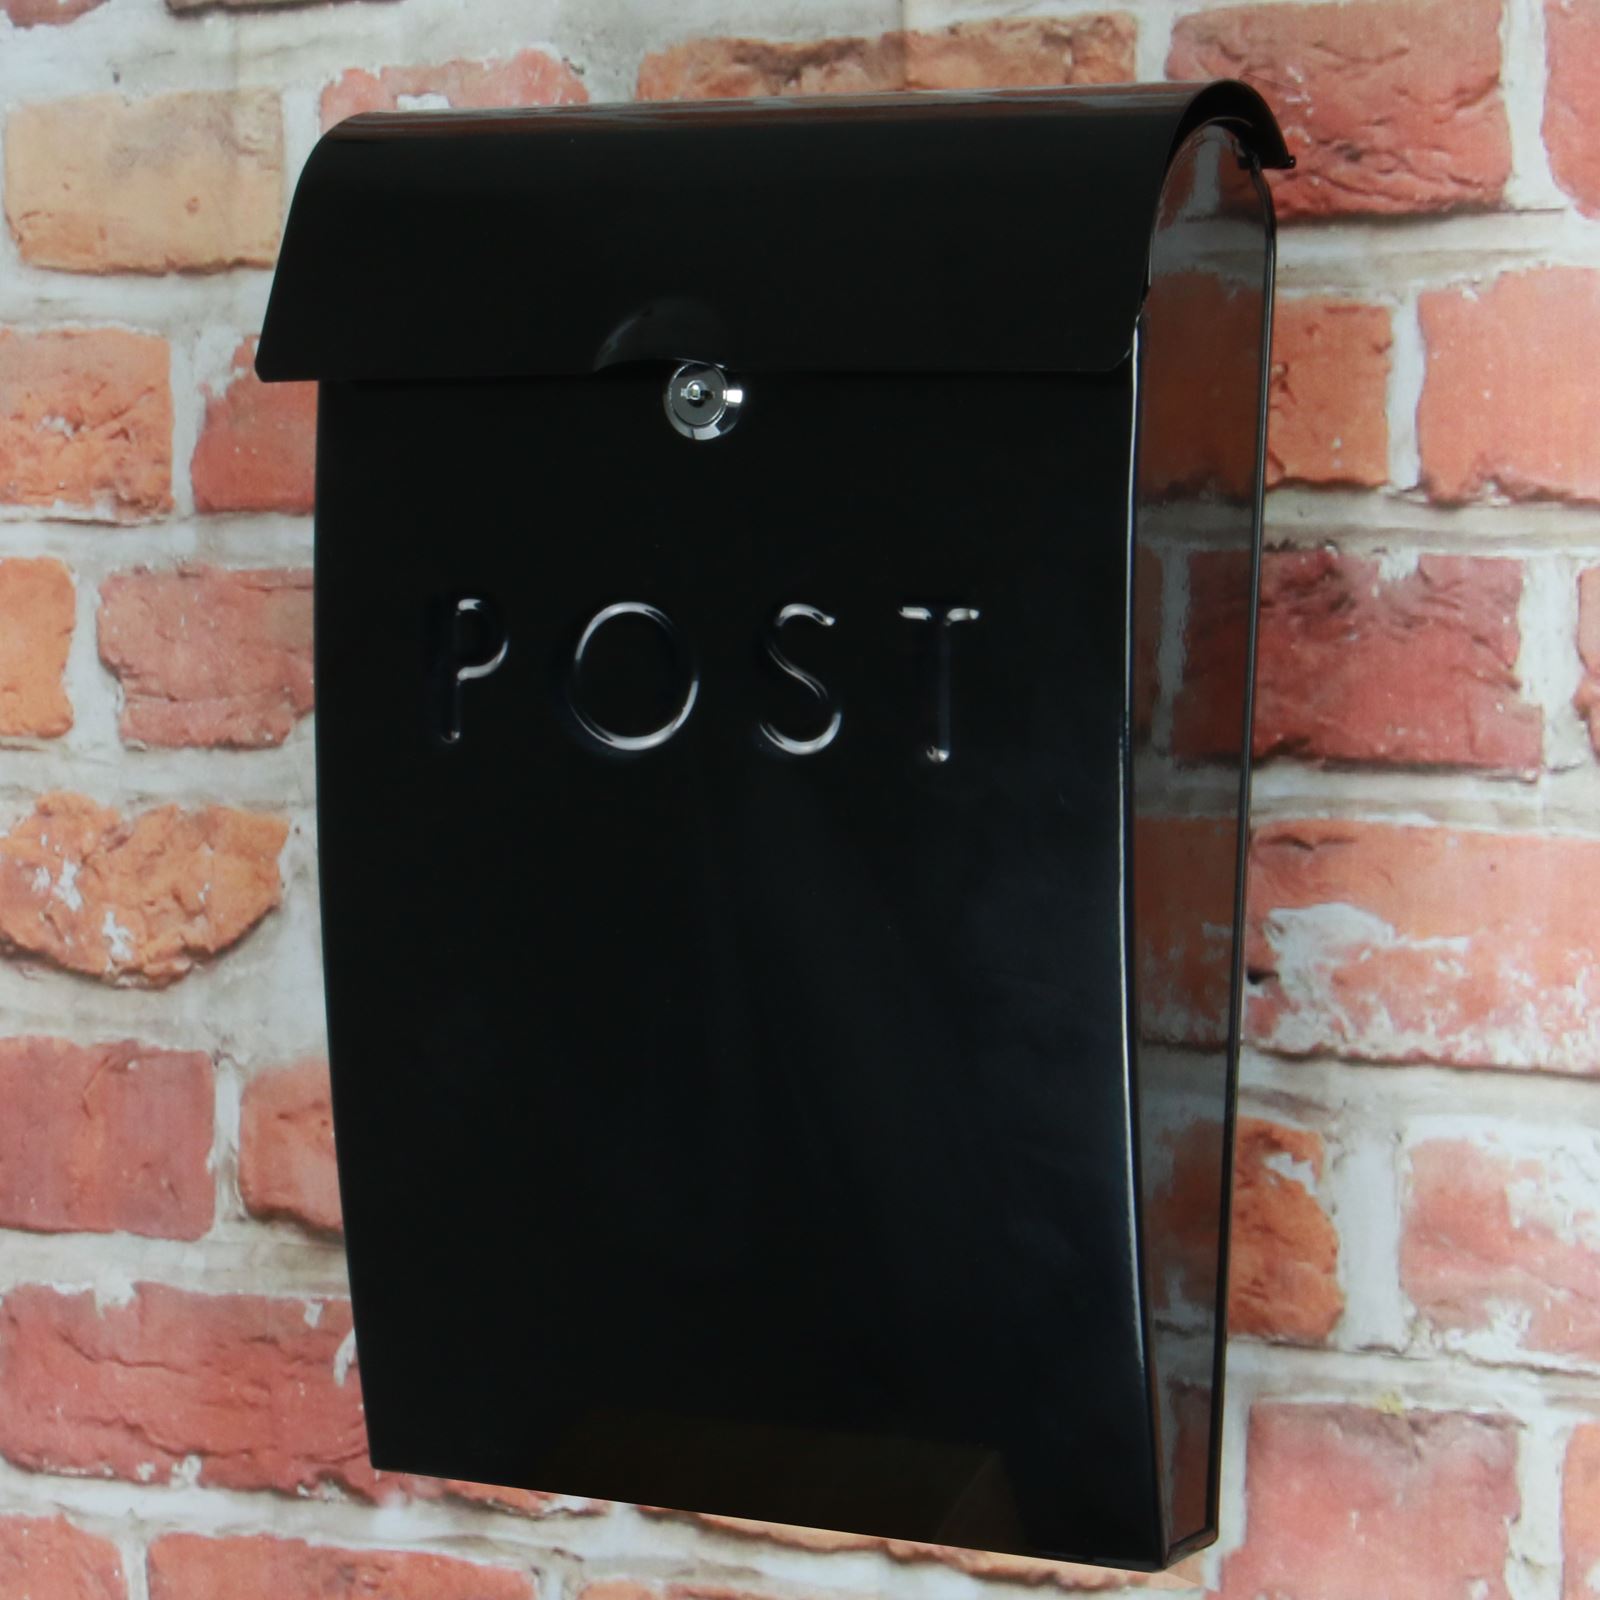 Wall Mounted Post Box in Black | M&W